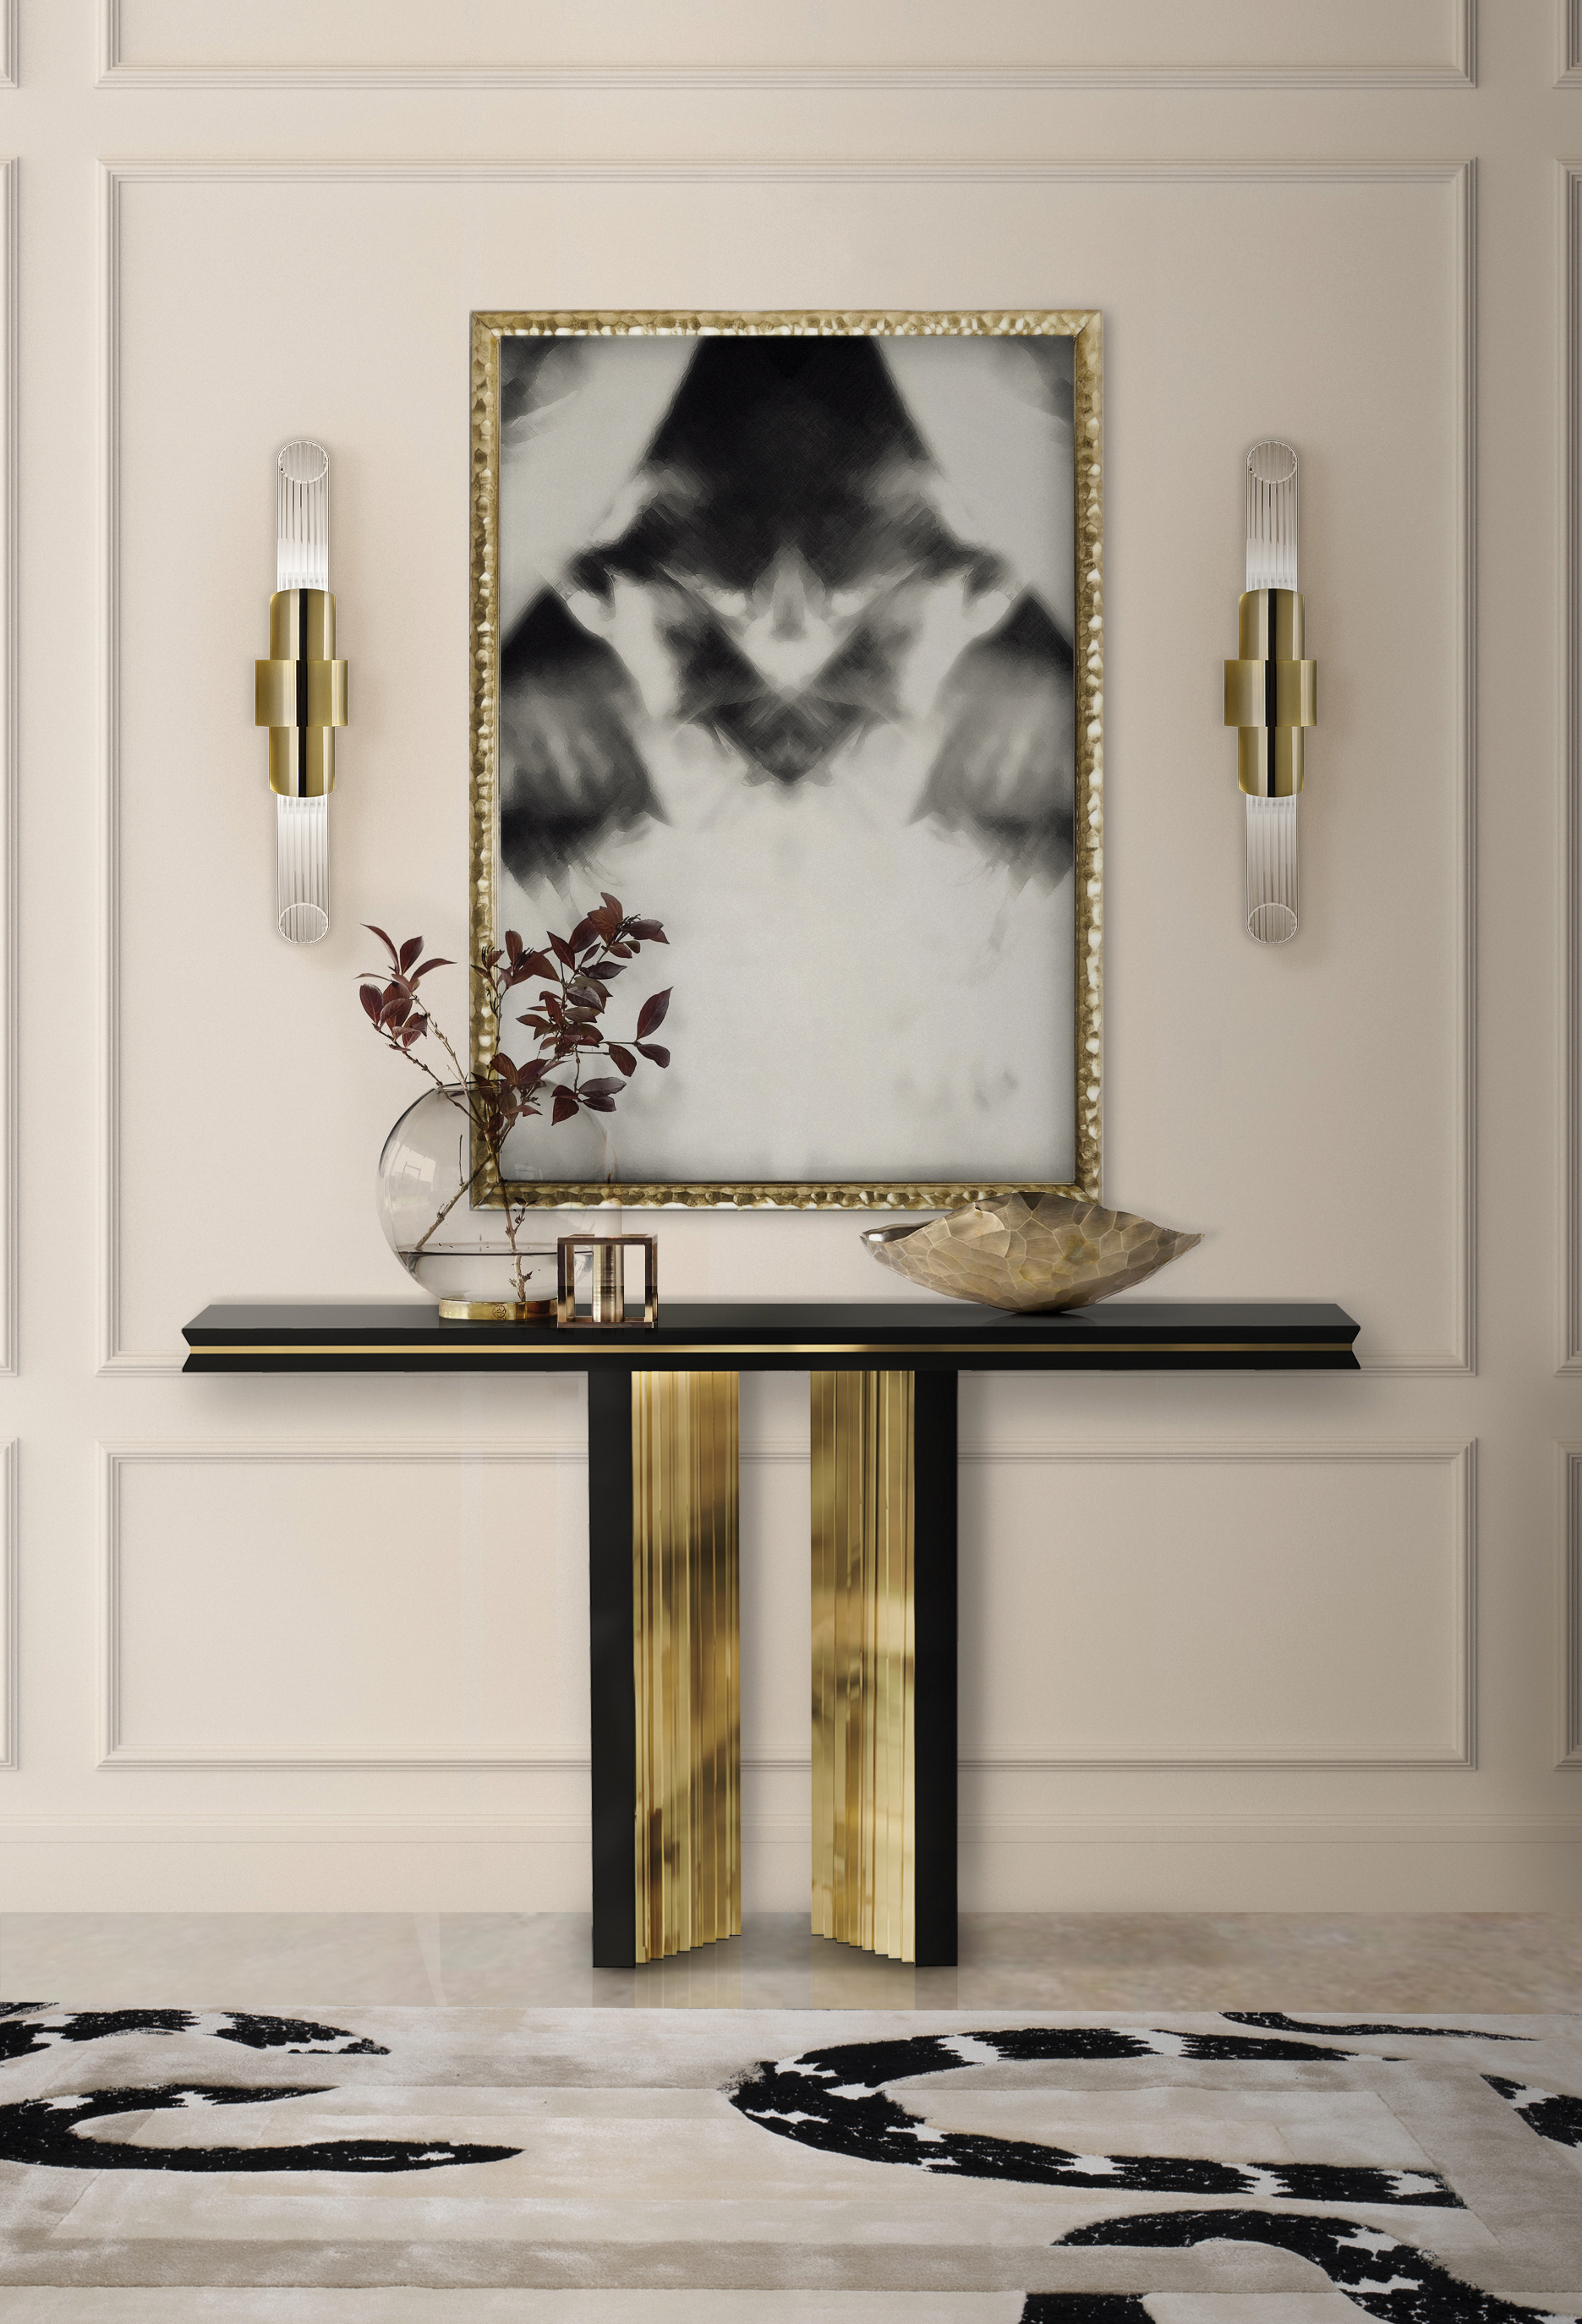 Luxury Interior Design - The Most Exquisite Console Selection